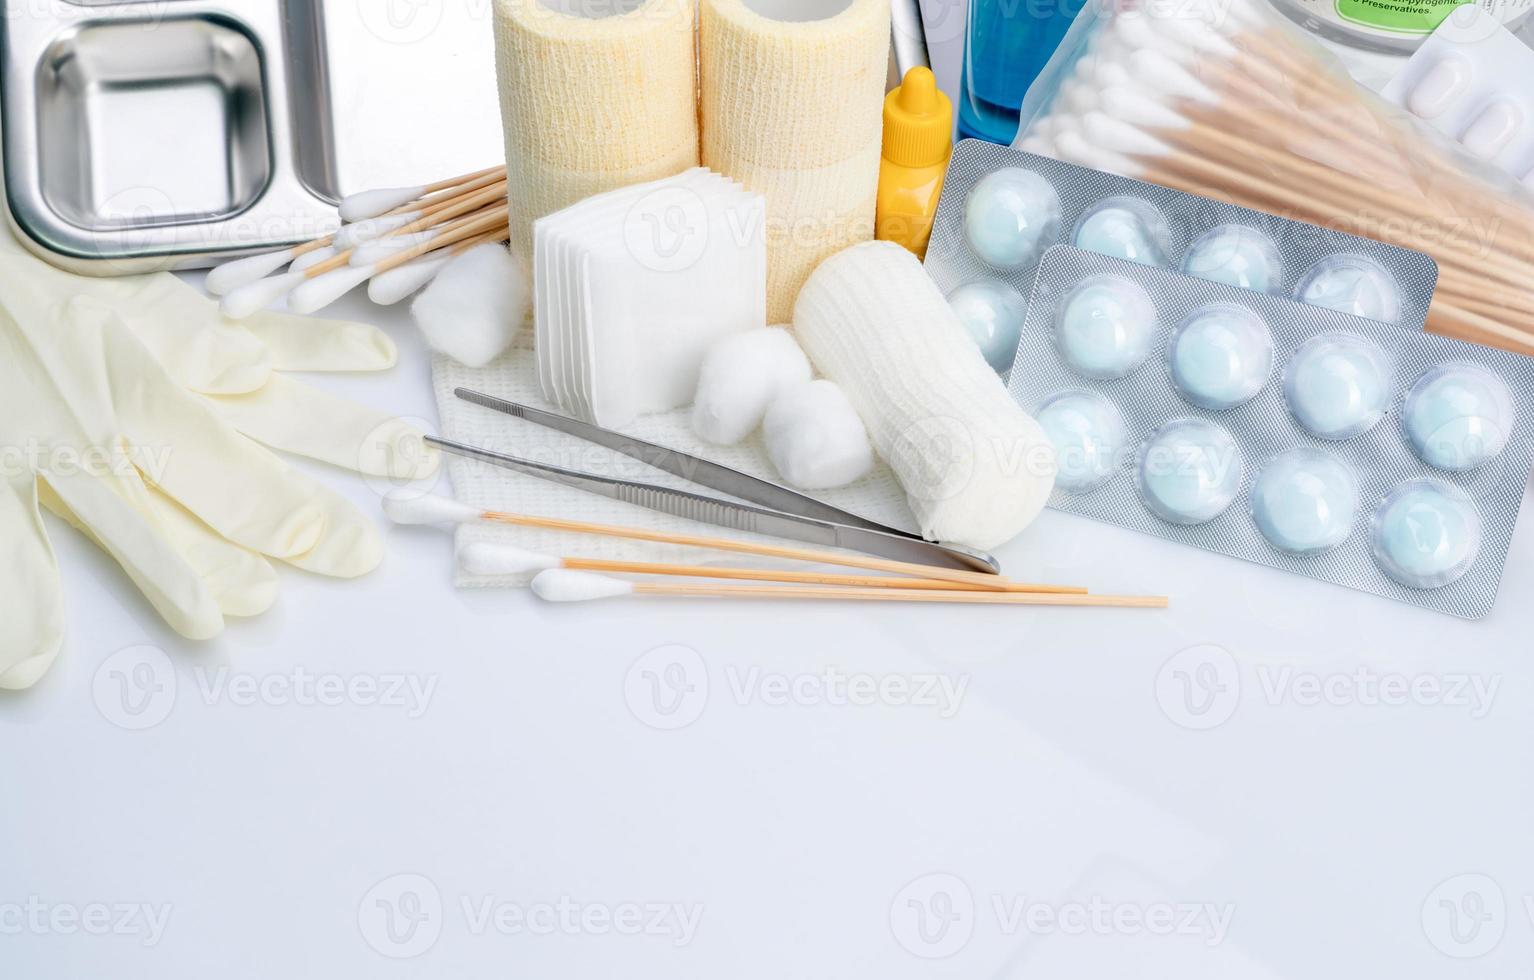 Wound care dressing set. Forceps, cotton stick, conform bandage, elastic cohesive retention bandage, cotton ball with alcohol, latex disposable gloves, and povidone-iodine. Medical supply for nurses. photo